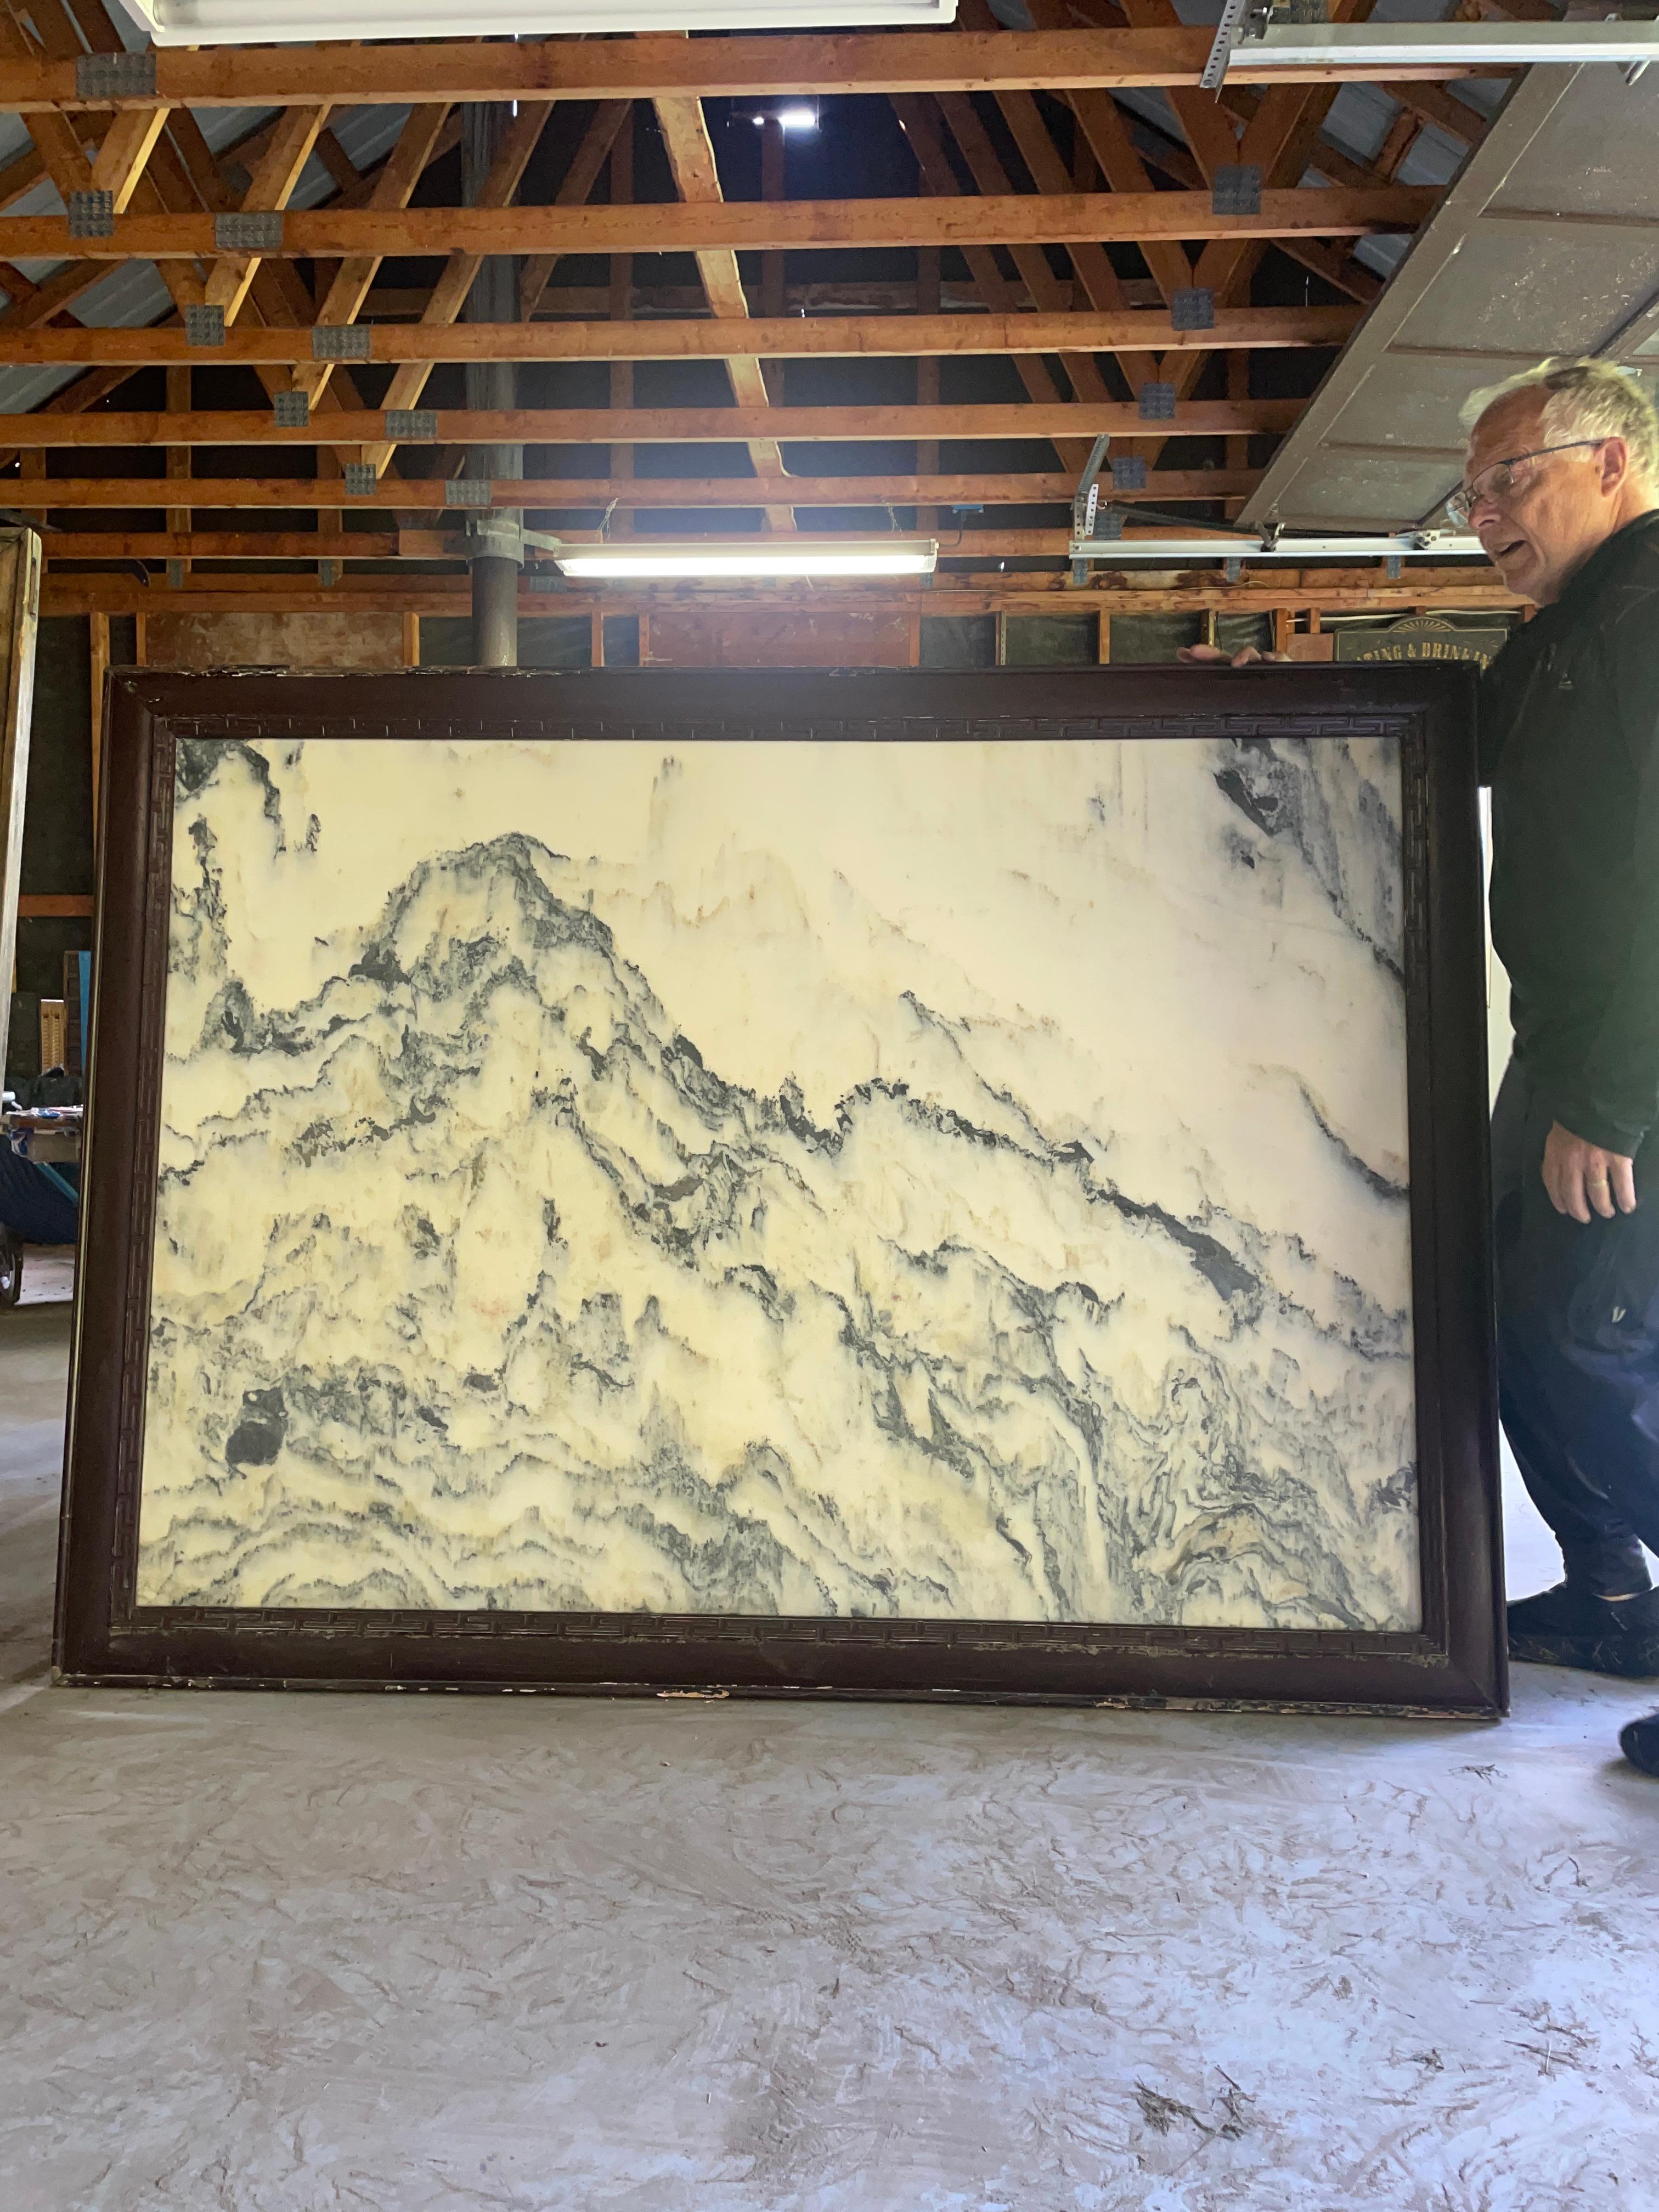 This Chinese extraordinary natural marble stone painting of a mountain range in green and white colors is called a dream stone Shih-hua. 

It is a monumental masterwork of nature. Totally natural.

Dimensions: 
Hardwood frame: 54 inches tall and 73